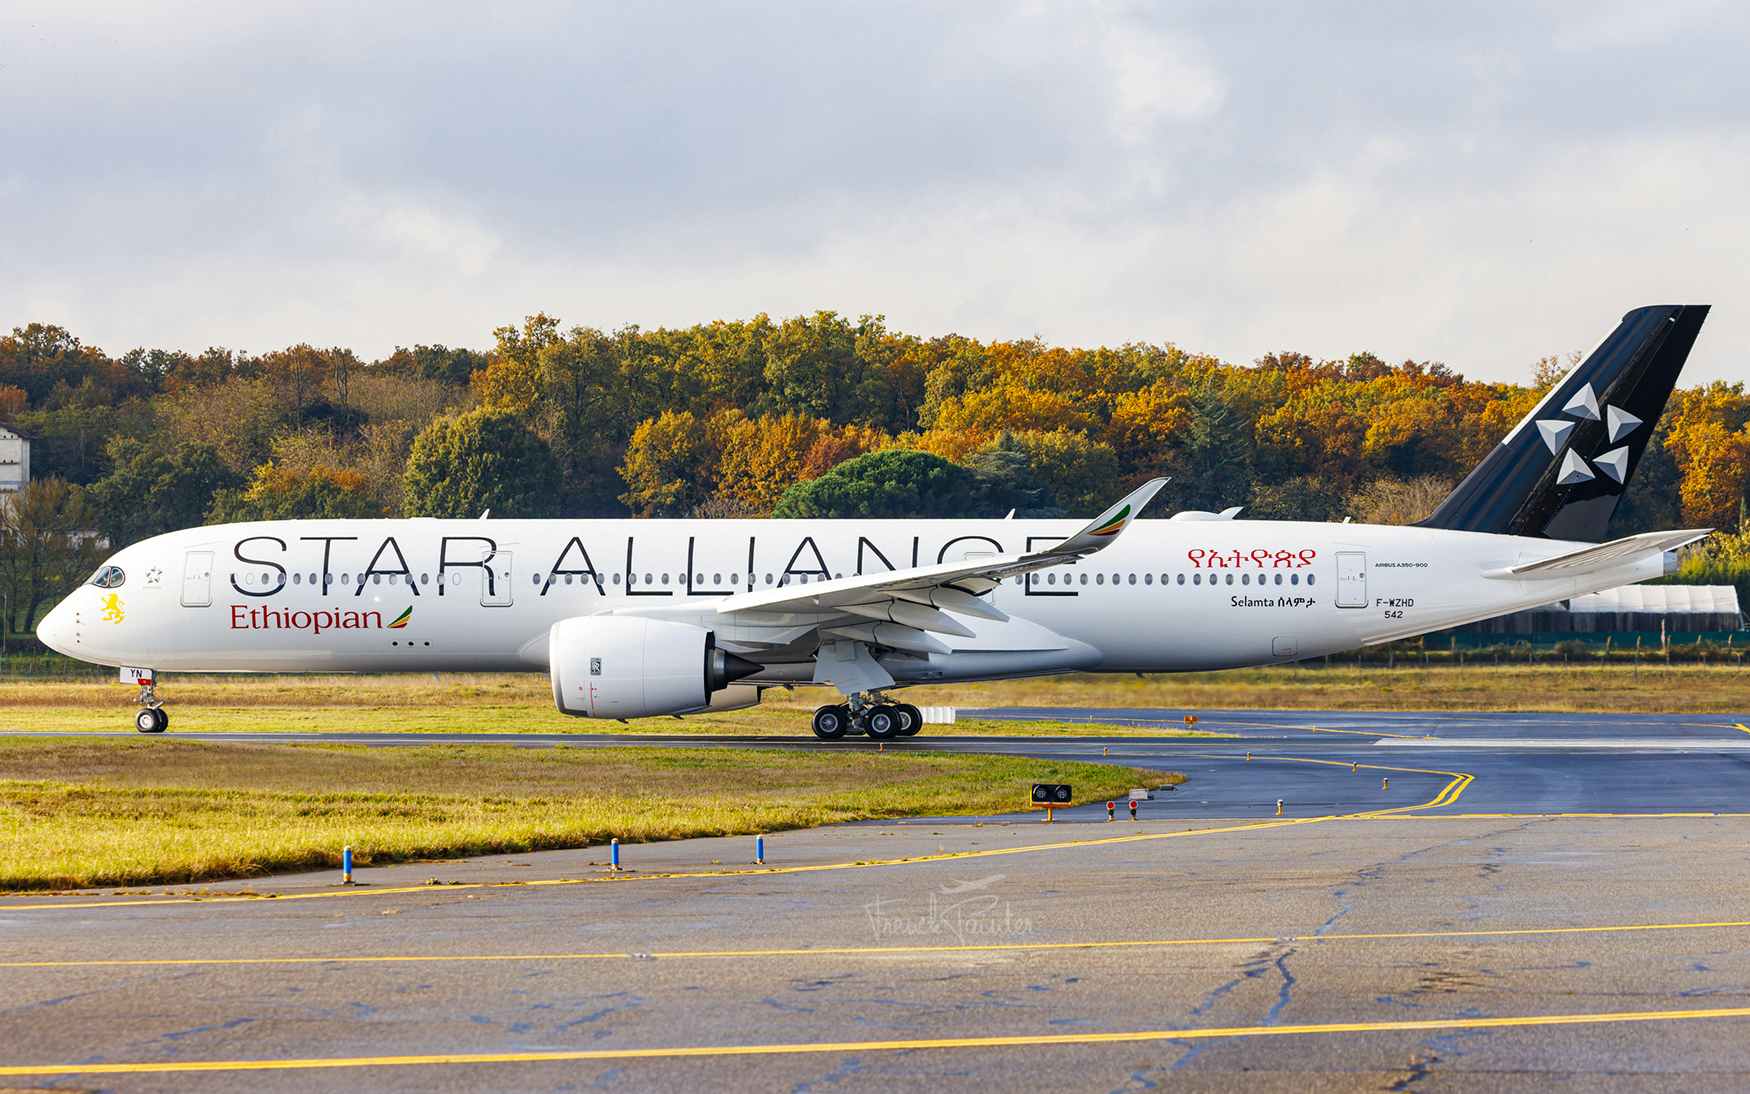 Ethiopian Airlines Star Alliance-branded airplane